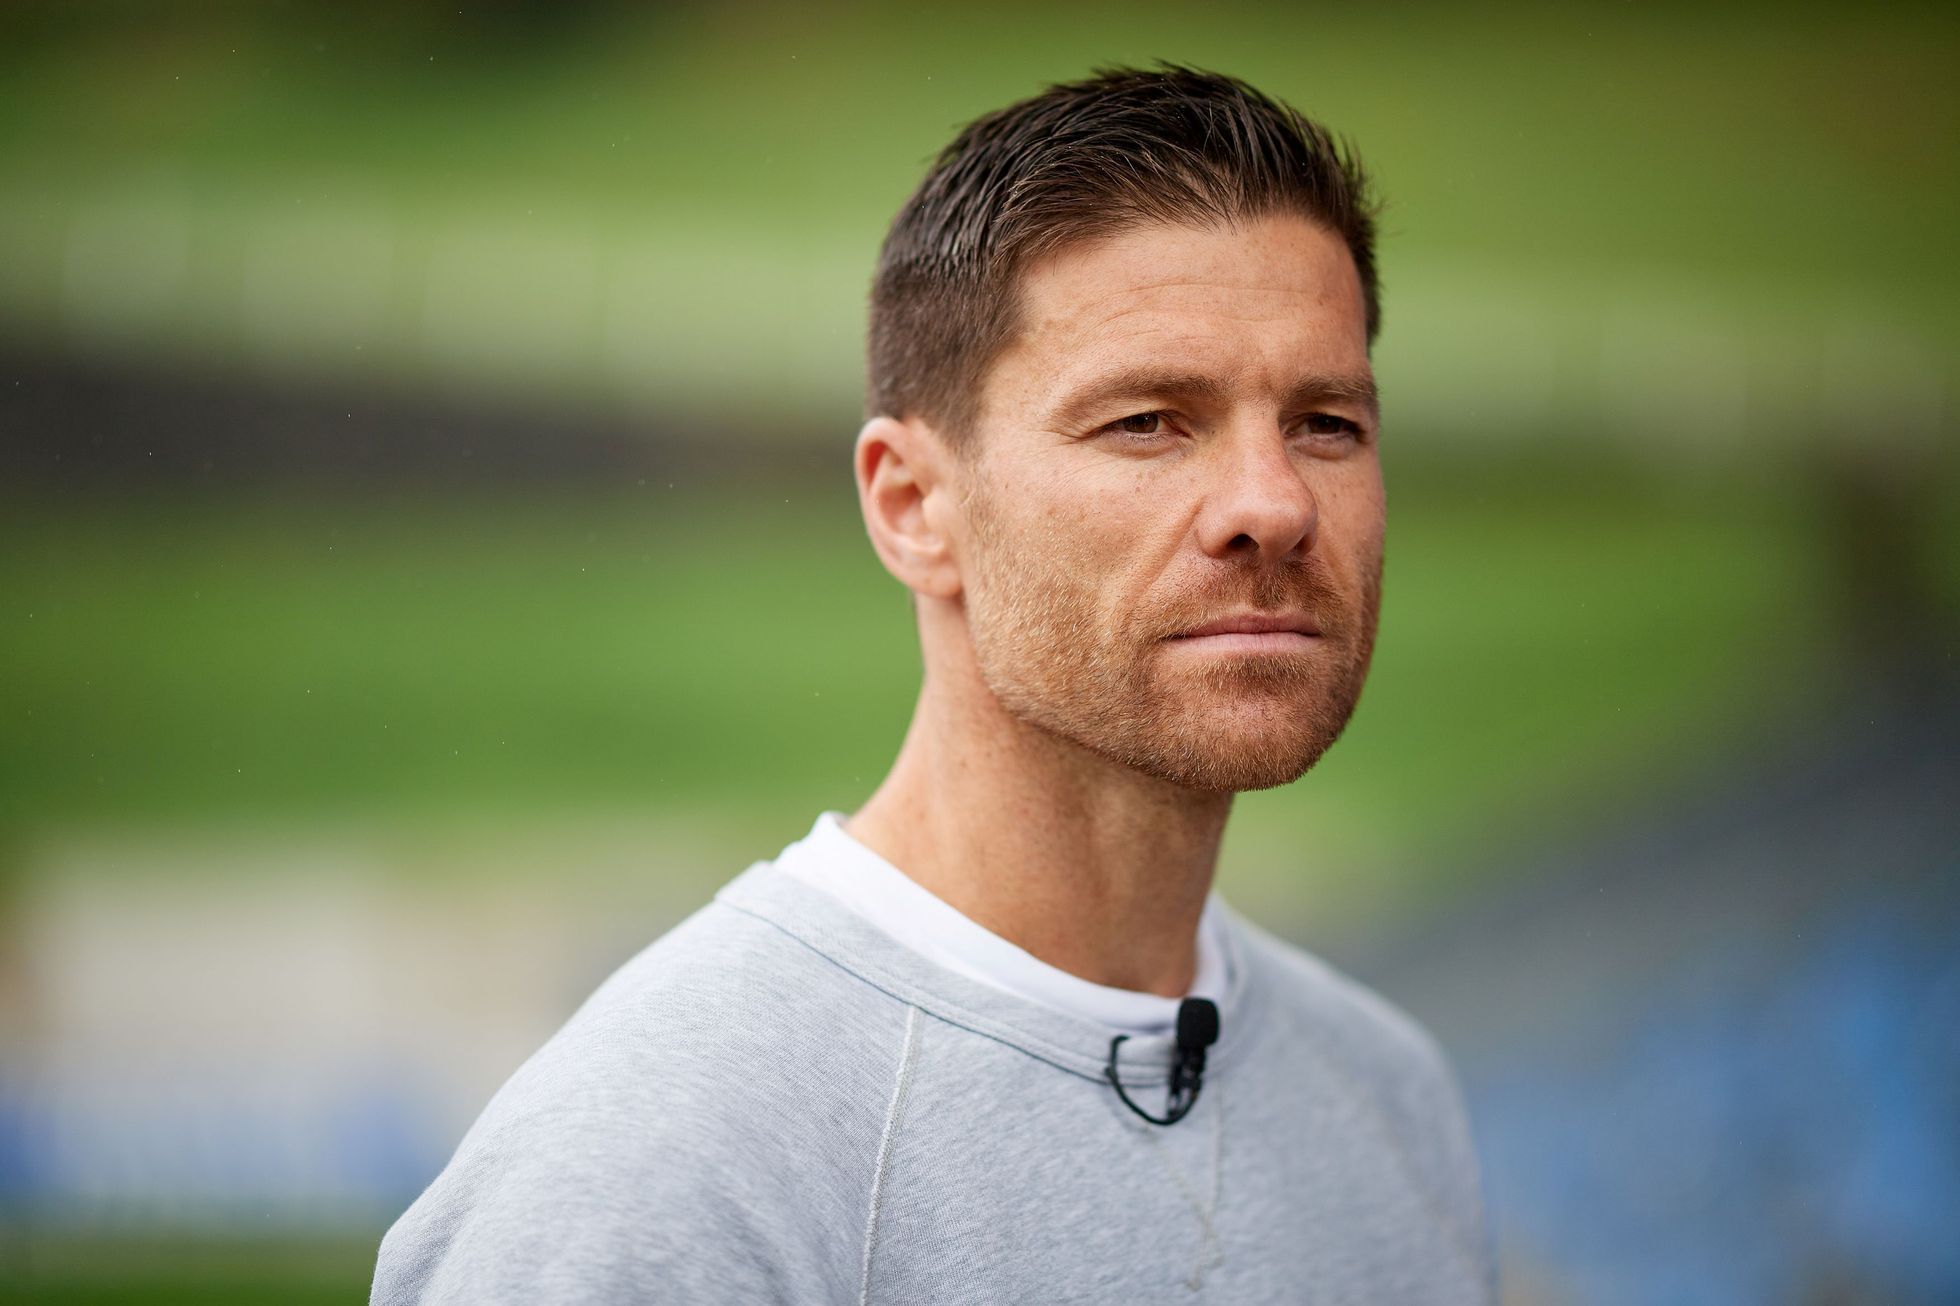 Former Liverpool and Real Madrid legend Xabi Alonso attends a news conference in San Sebastian